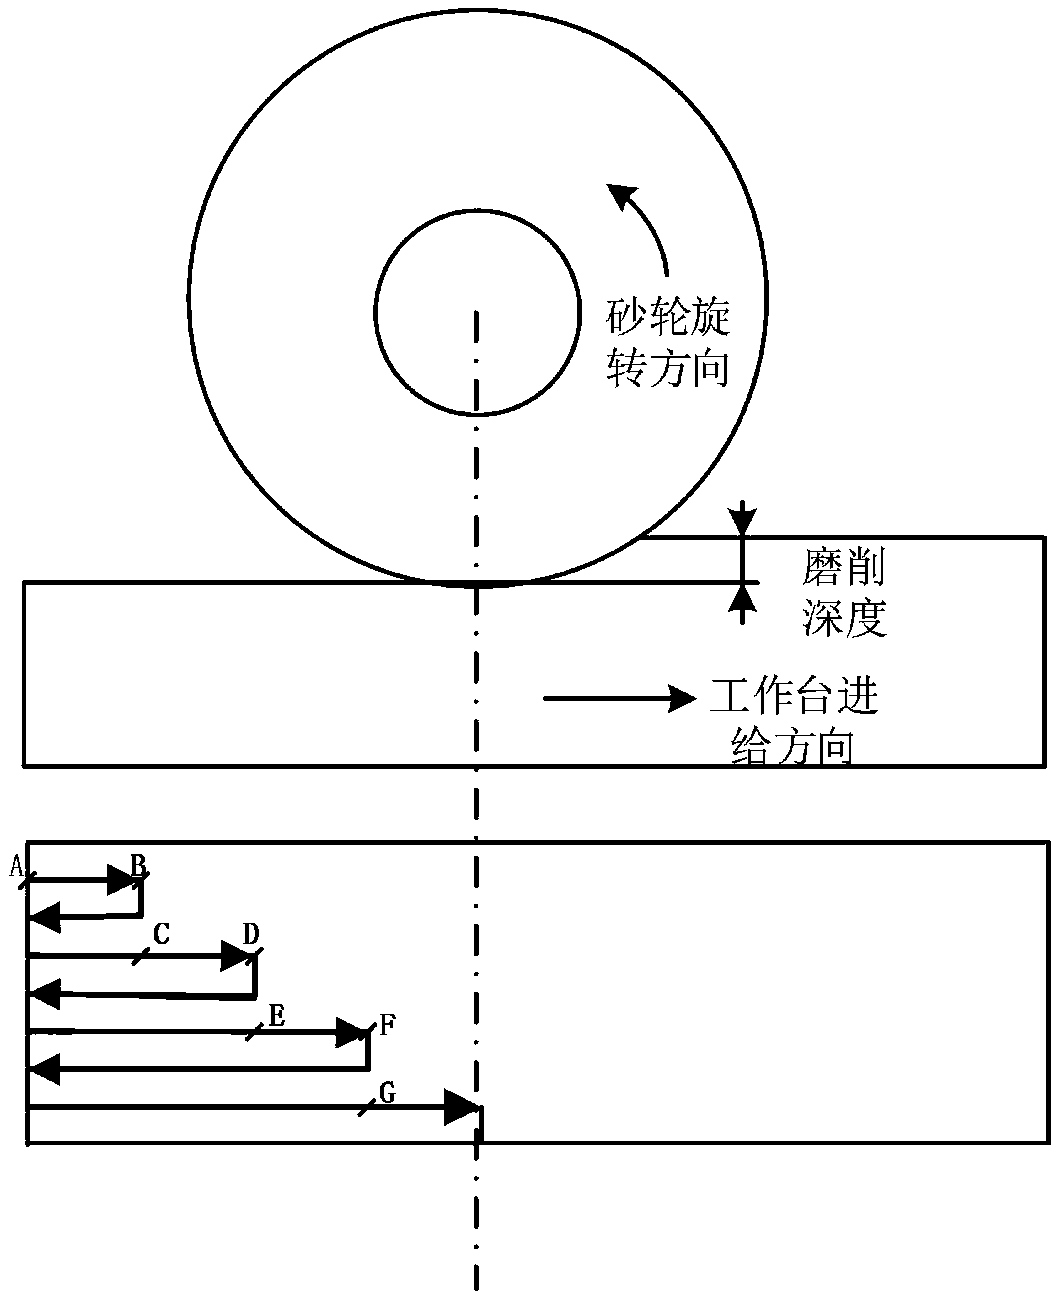 Vibrated grinding process method for materials difficult to machine